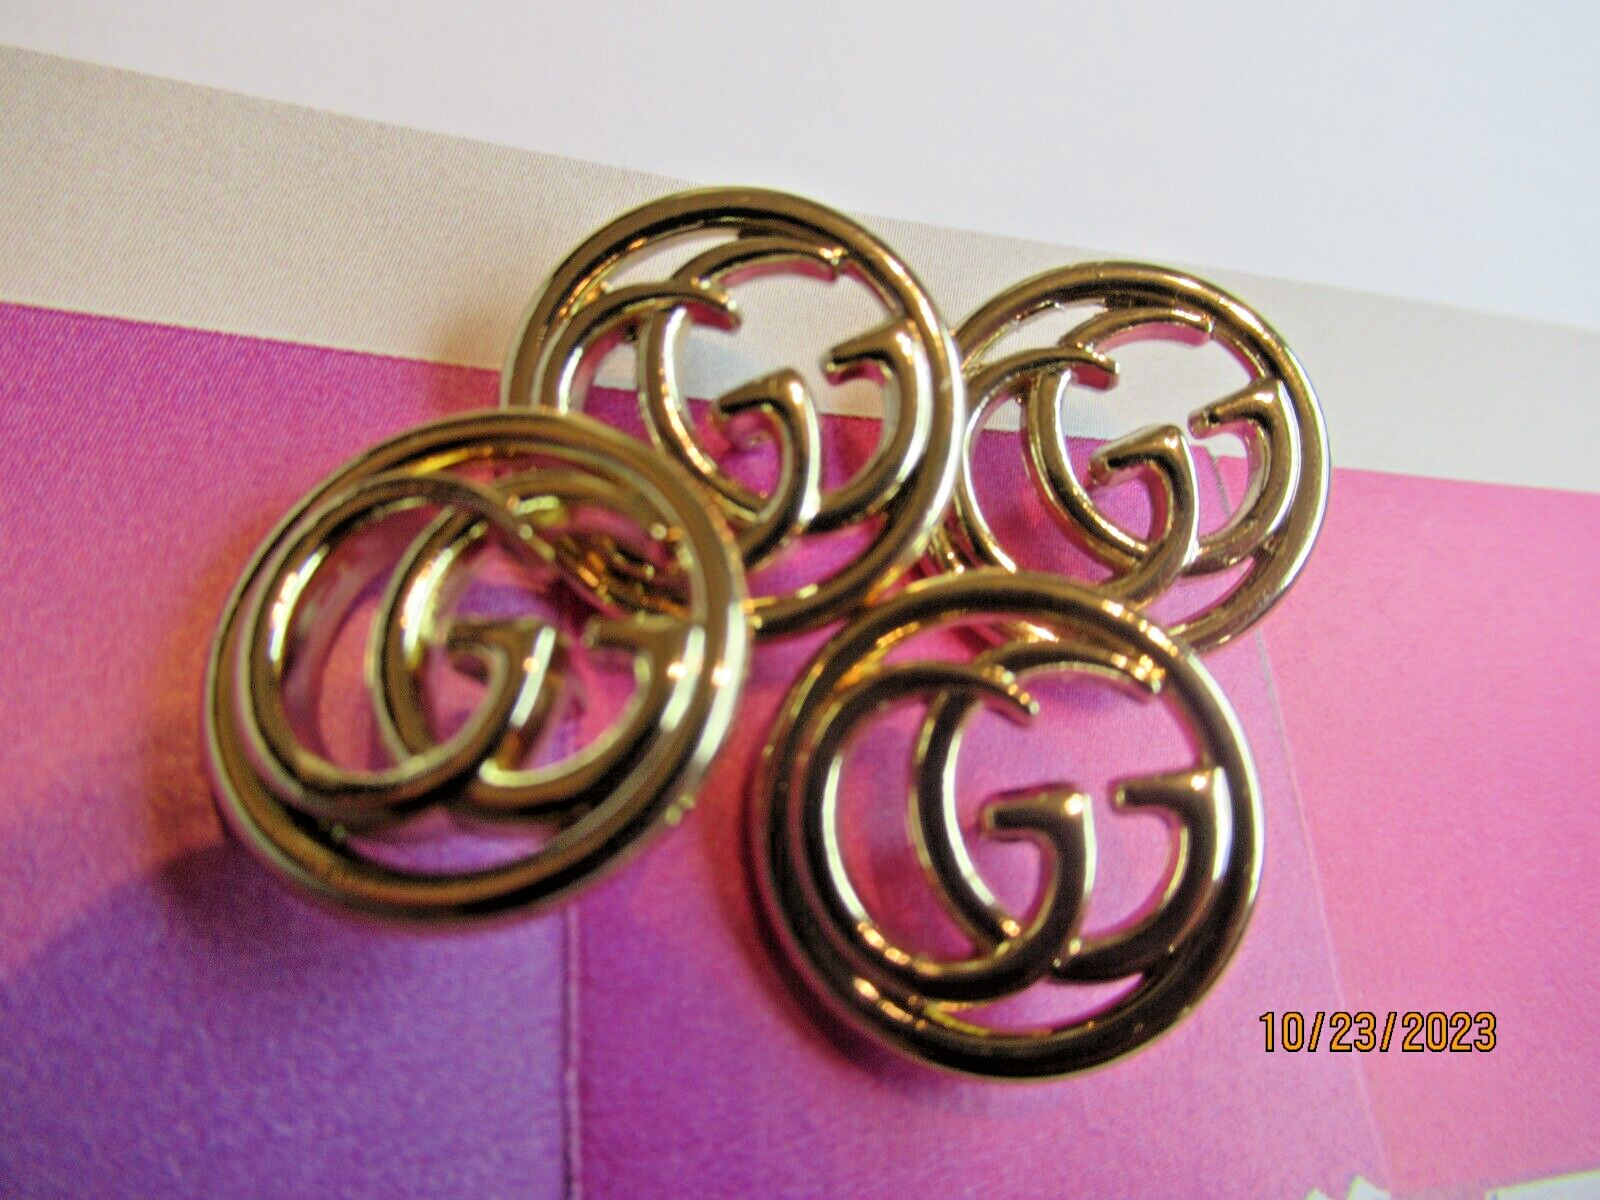 GUCCI 4 BUTTONS  18MM gold tone, METAL   THIS IS FOR 4